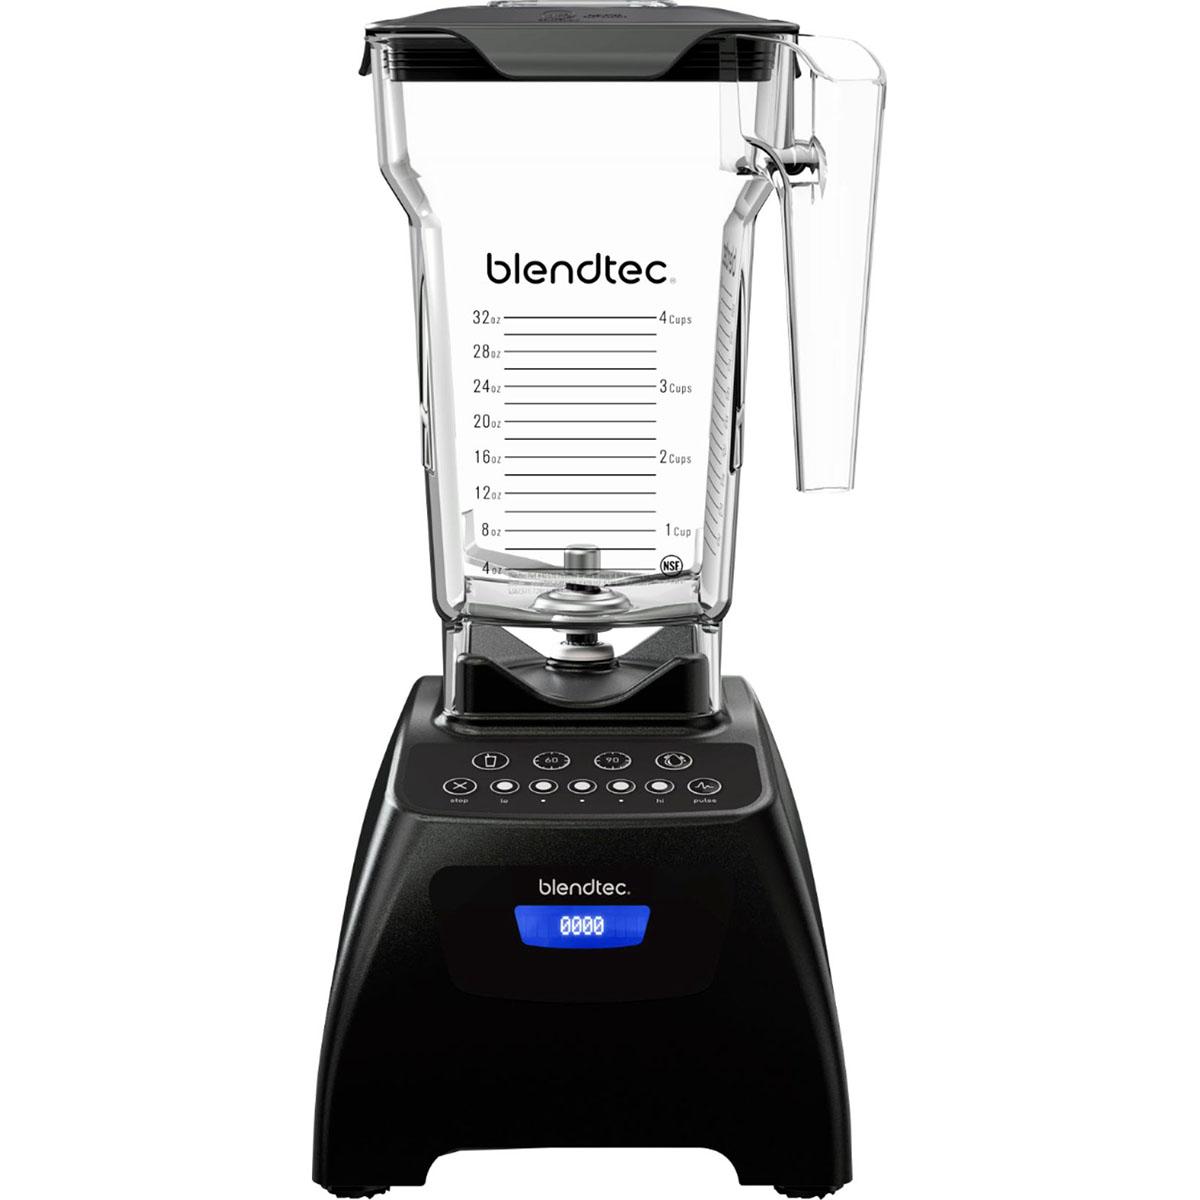 Blendtec Classic 5-Speed Blender with FourSide Jar for $199.99 Shipped